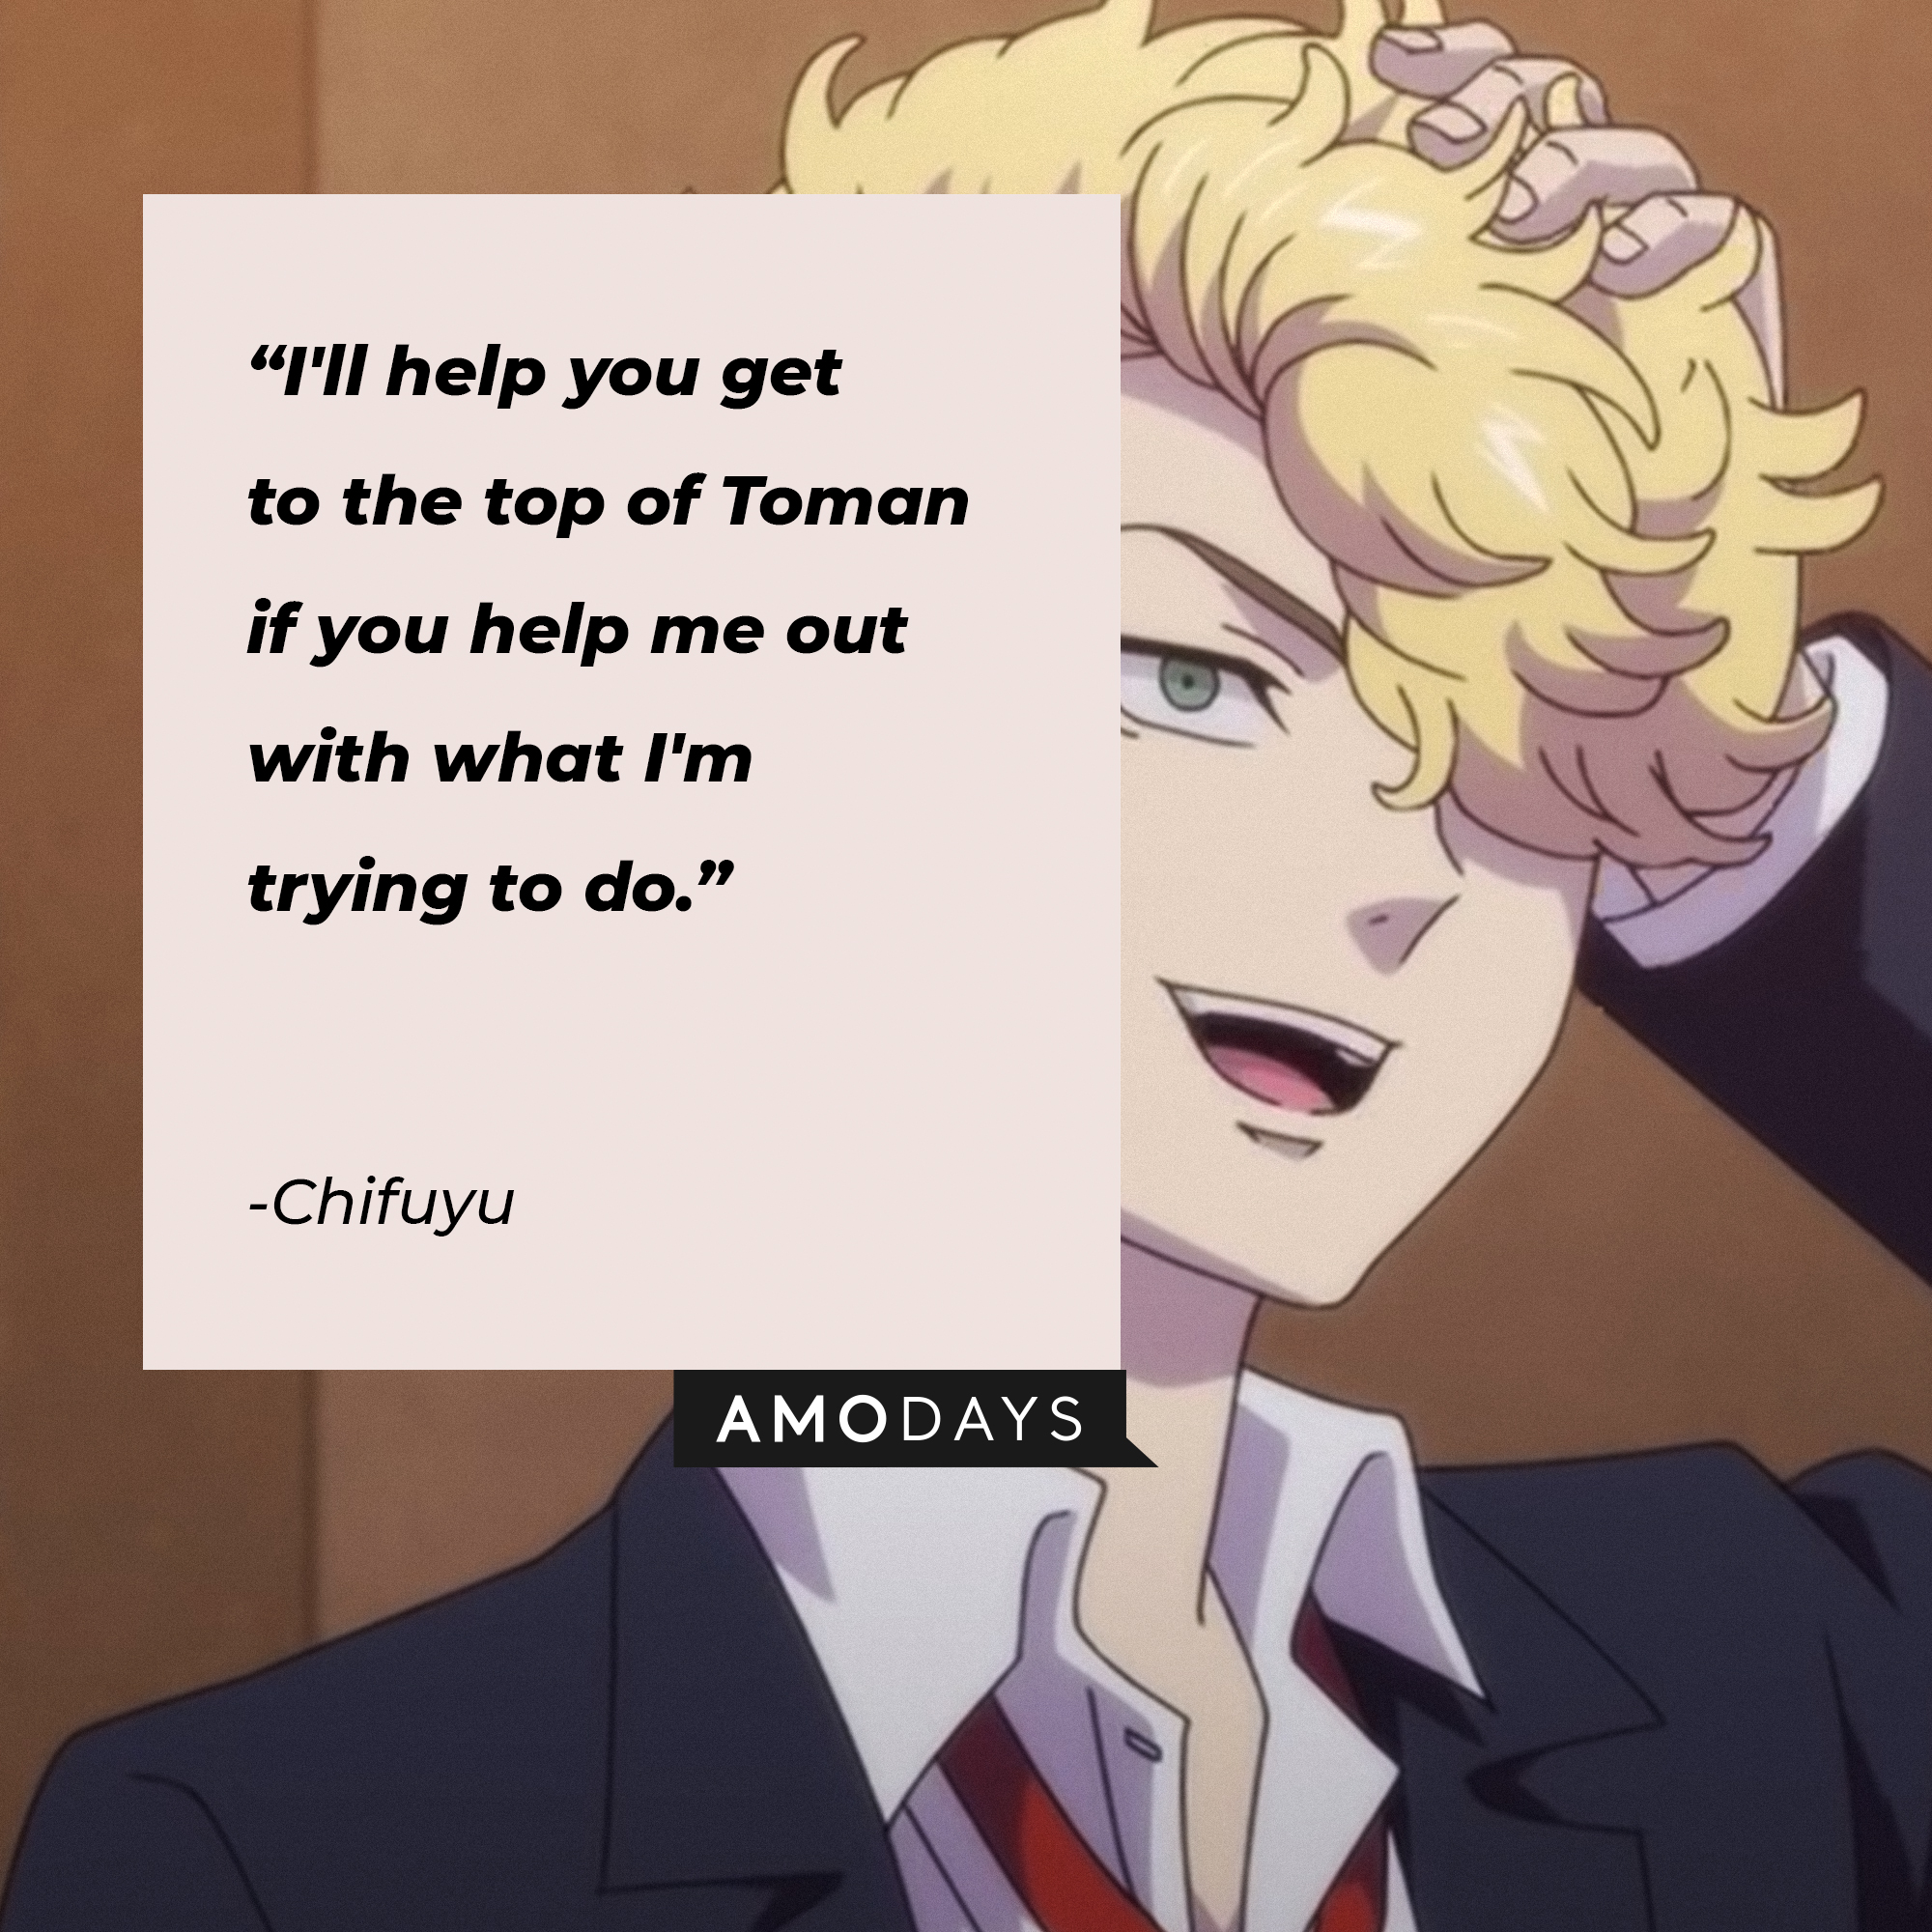 Chifuyu's quote: "I'll help you got to the top of Toman if you help me out with what I'm trying to do." | Source: Youtube.com/Crunchyroll Collection